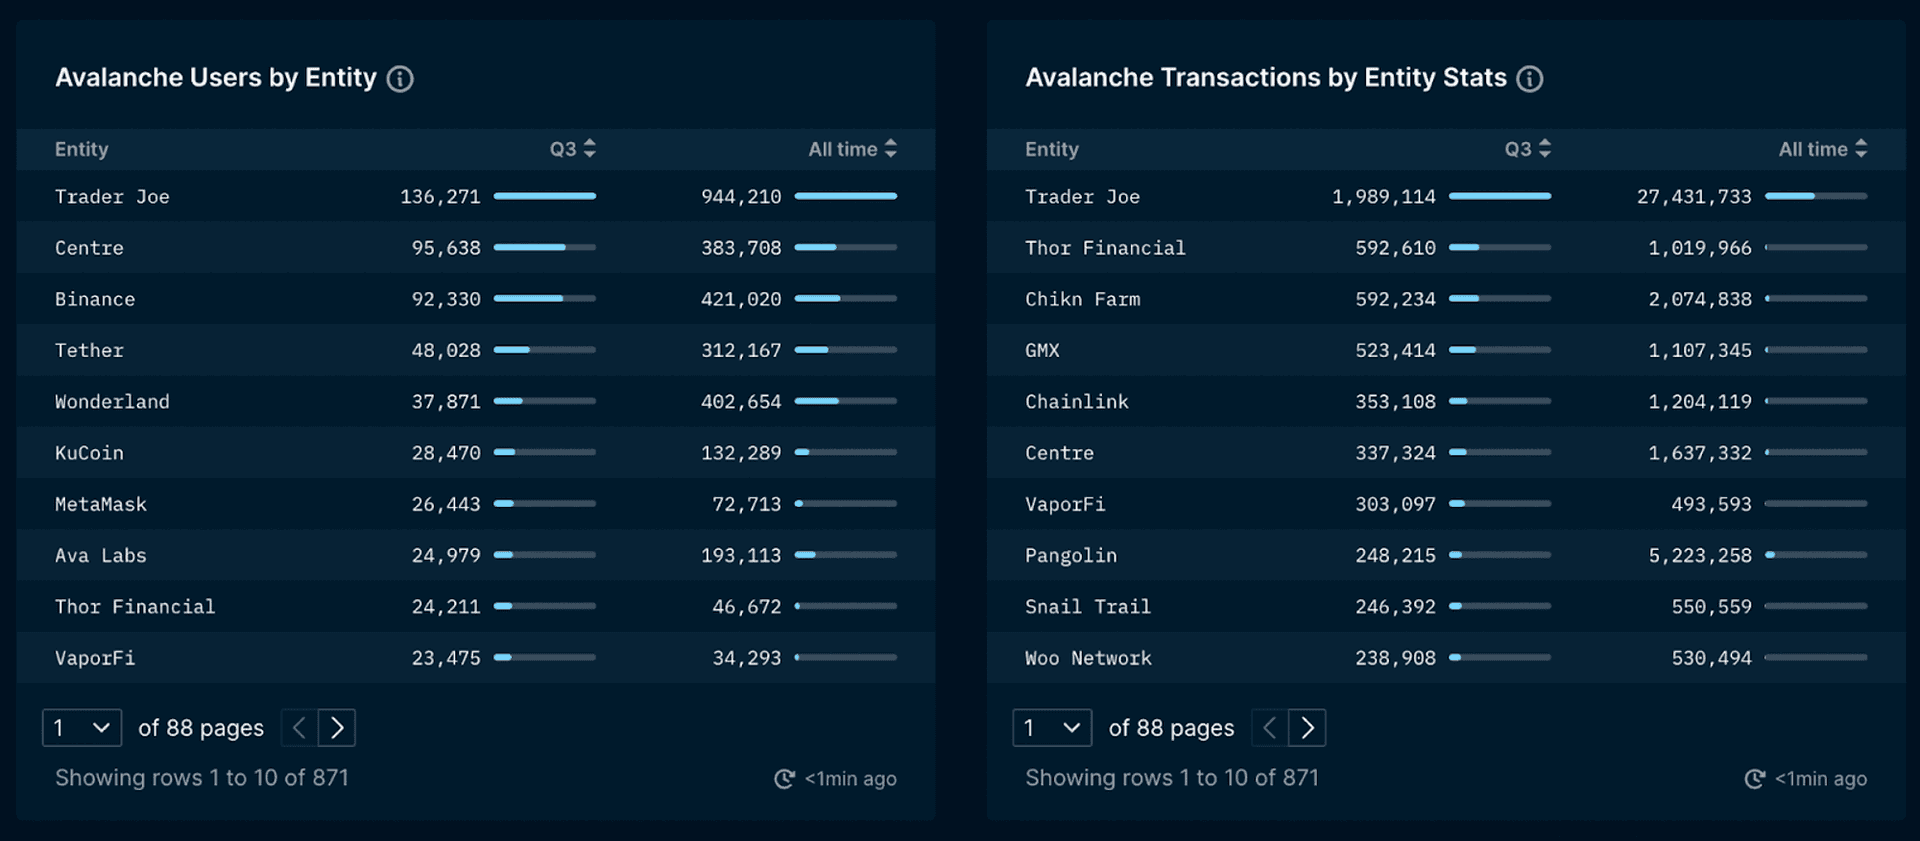 Top Entities Based on Users and Transactions (data excludes unlabelled entities)